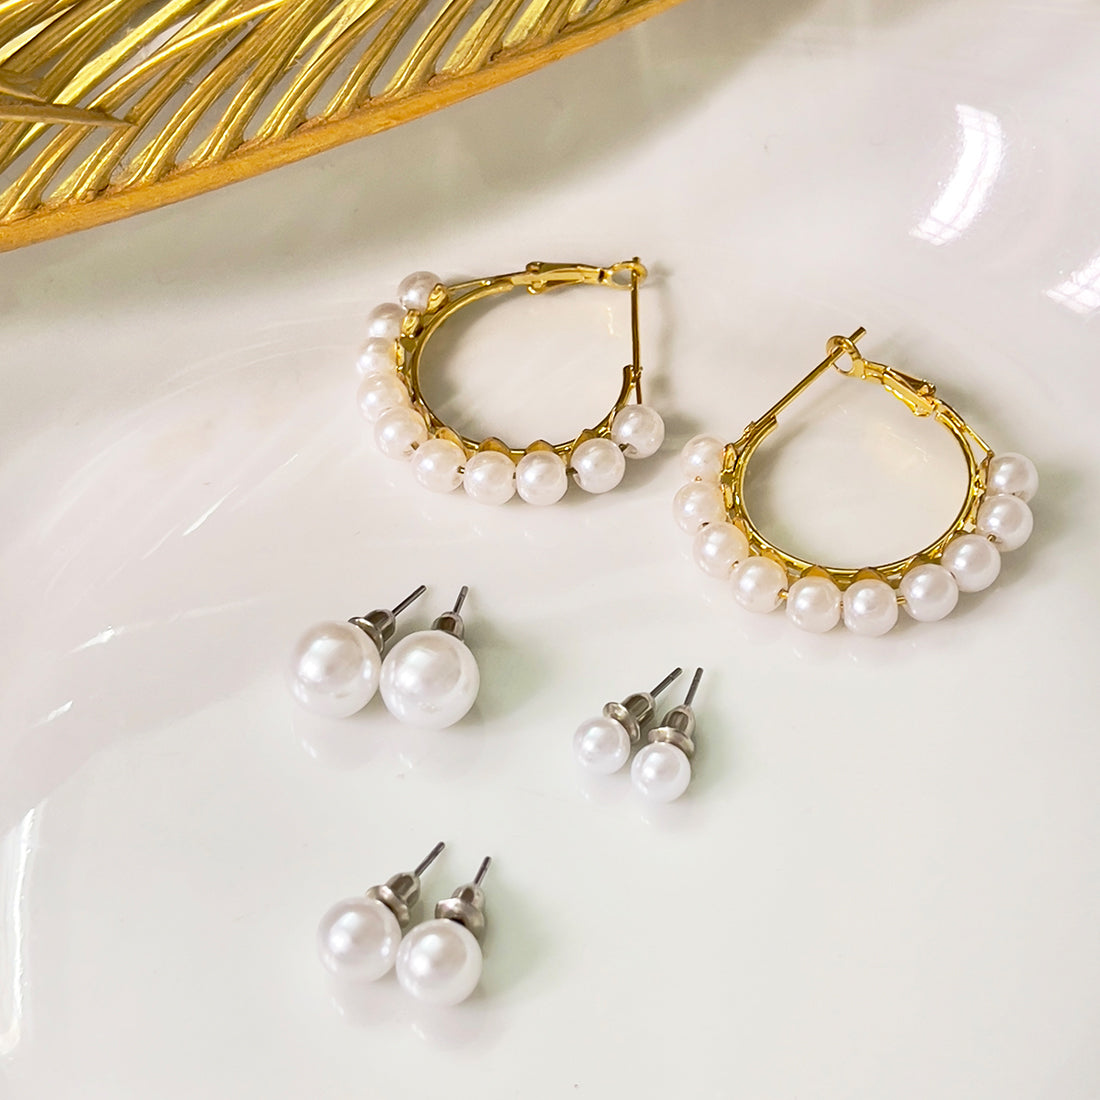 Set Of 4 Pearl Studs In Different Sizes & Gold-Toned Pearl Studded Hoop Earrings